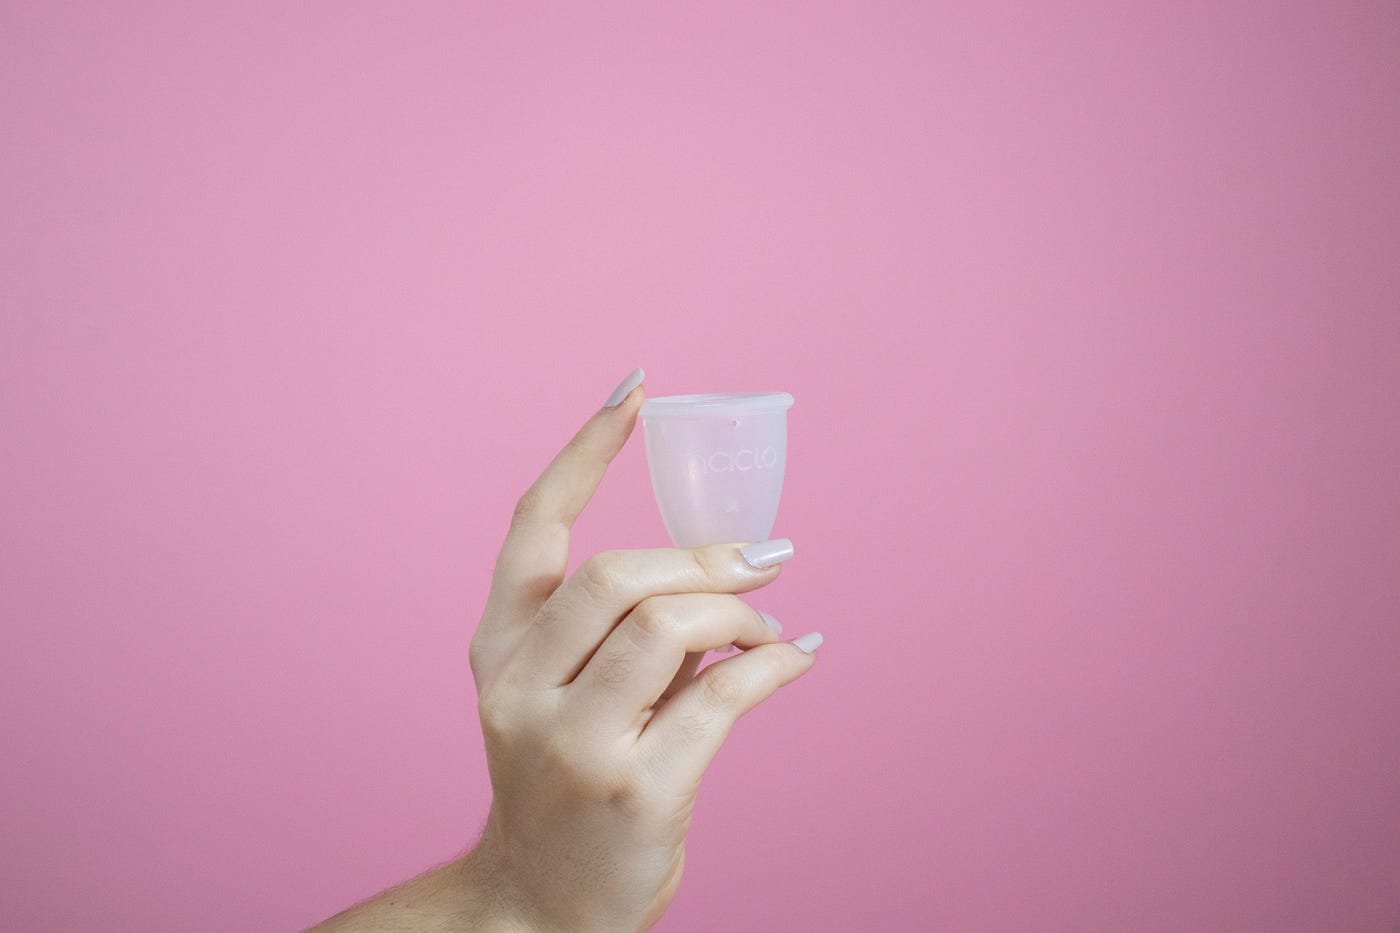 Can your menstrual cup suck out your cervix? An expert says